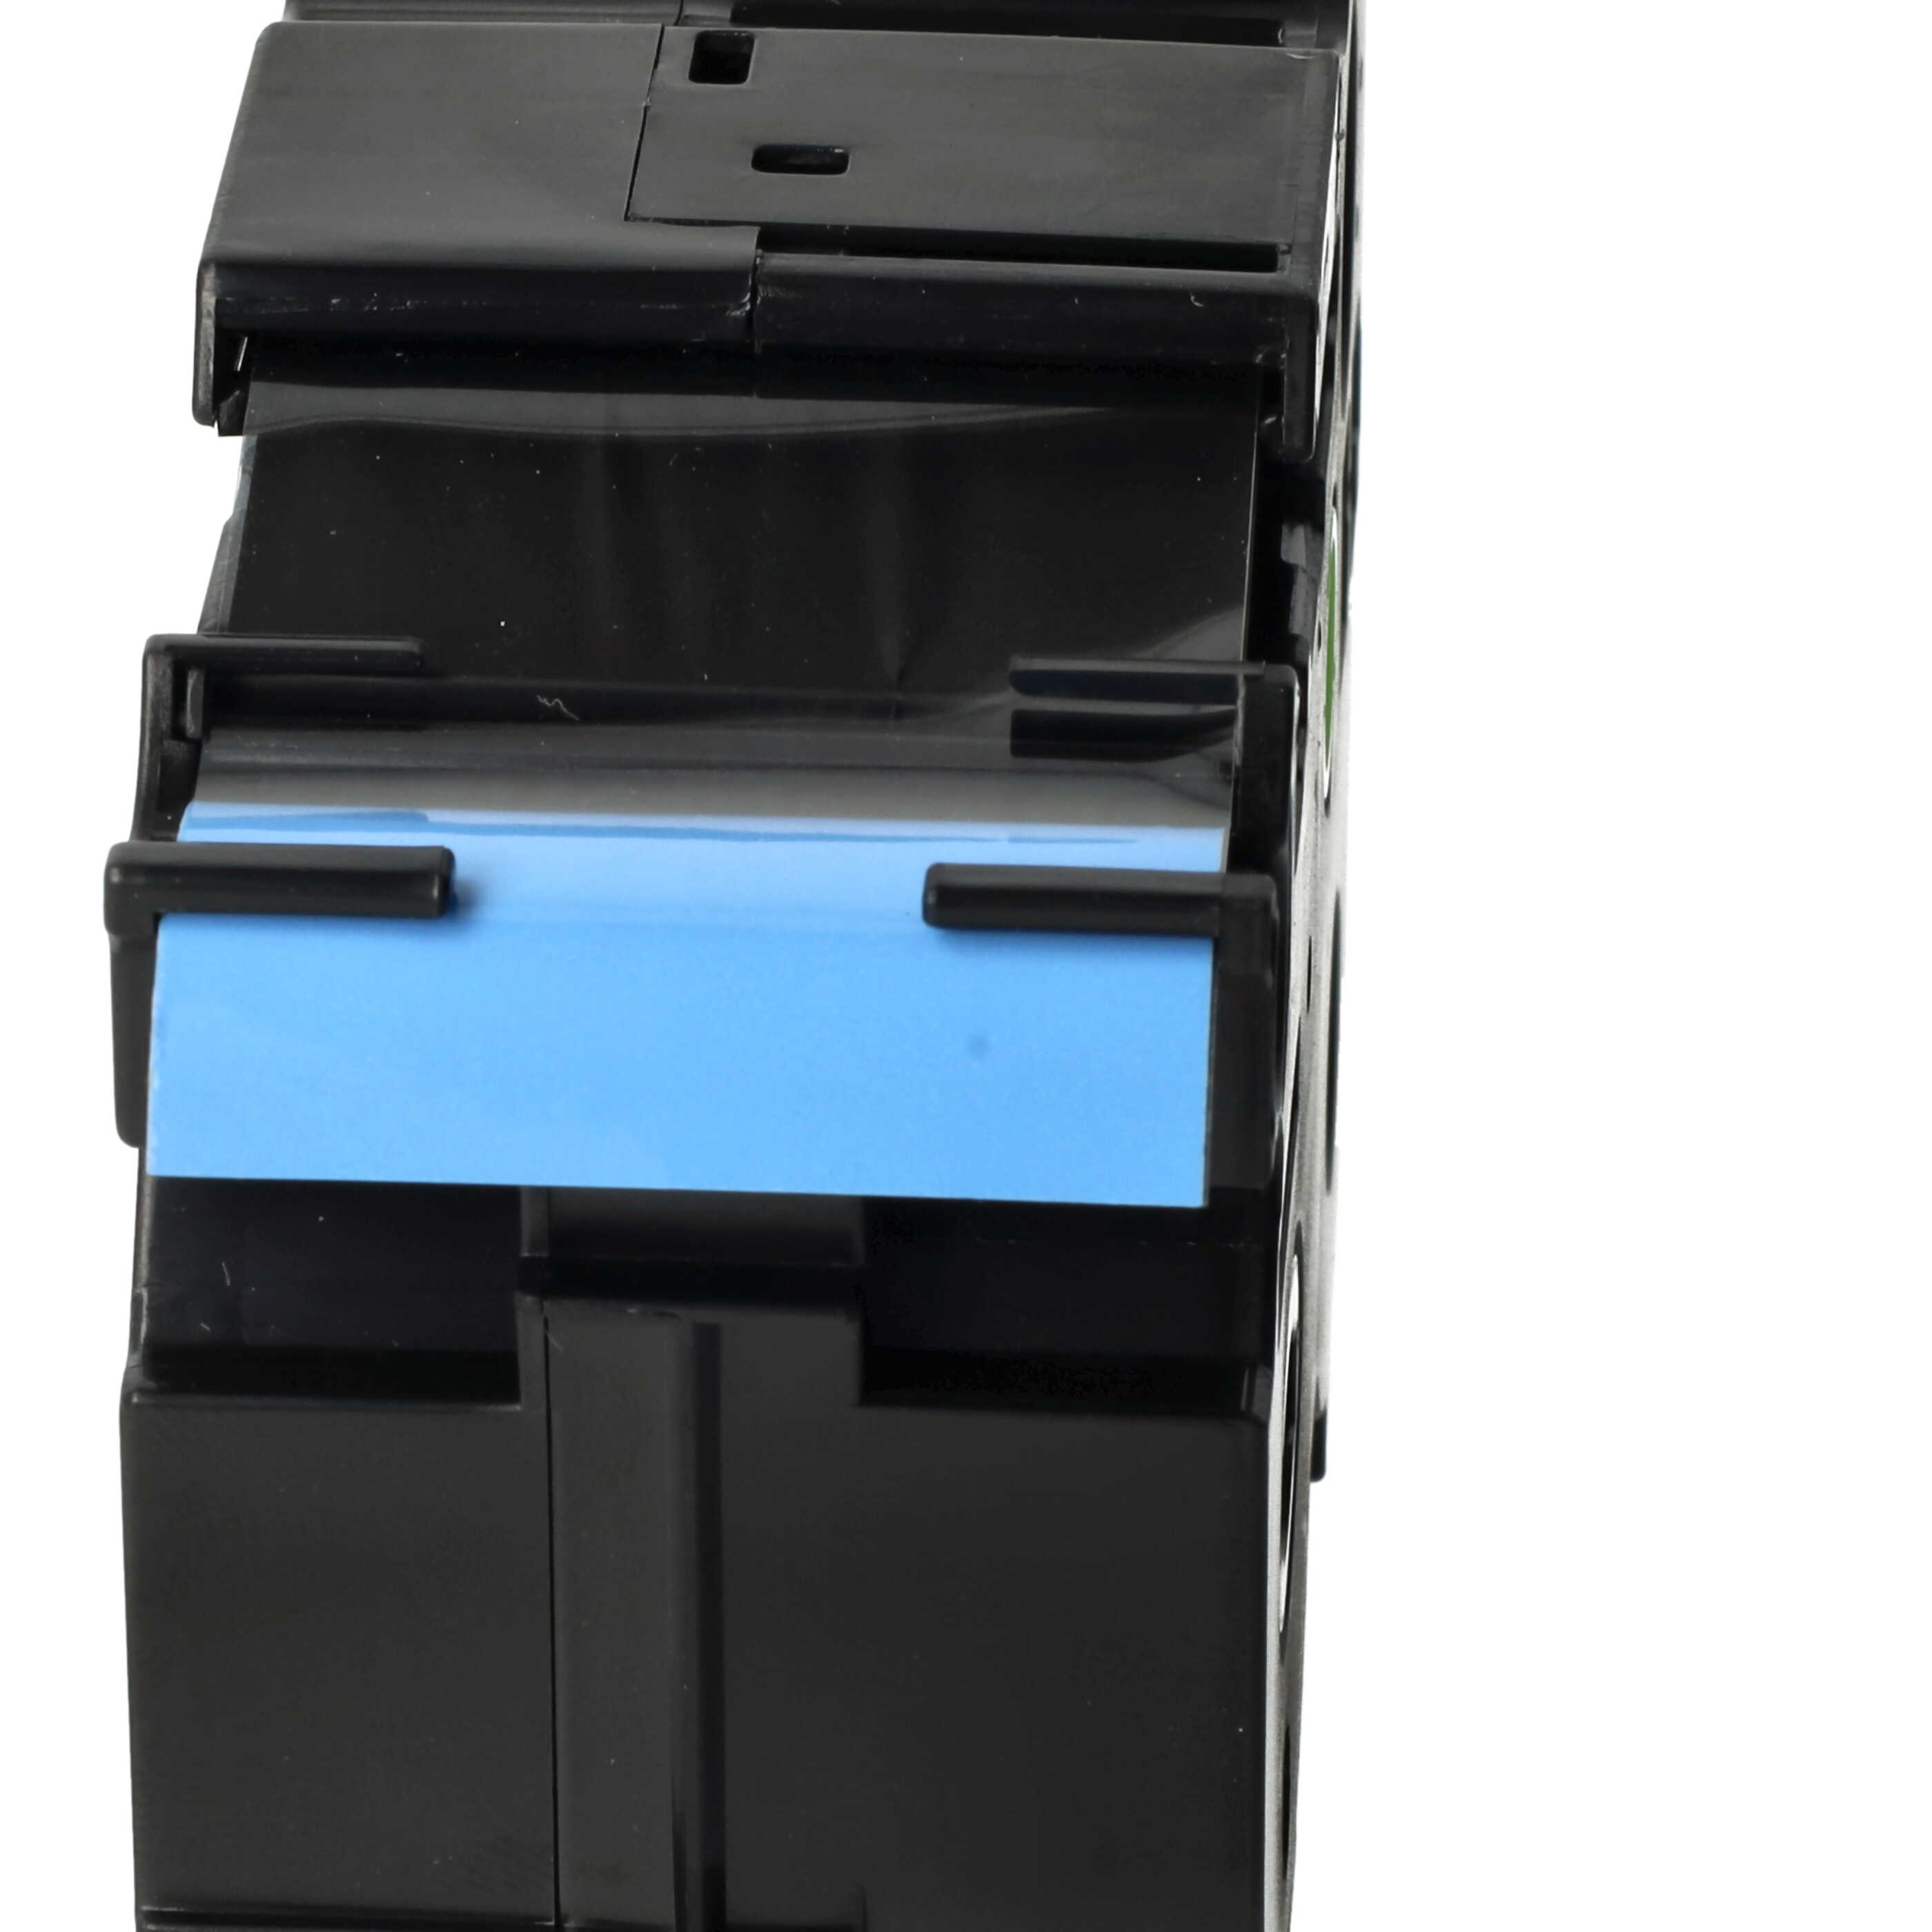 Label Tape as Replacement for Brother AHe-S561, HGE-S561, HGES561 - 36 mm Black to Blue, Extra Stark